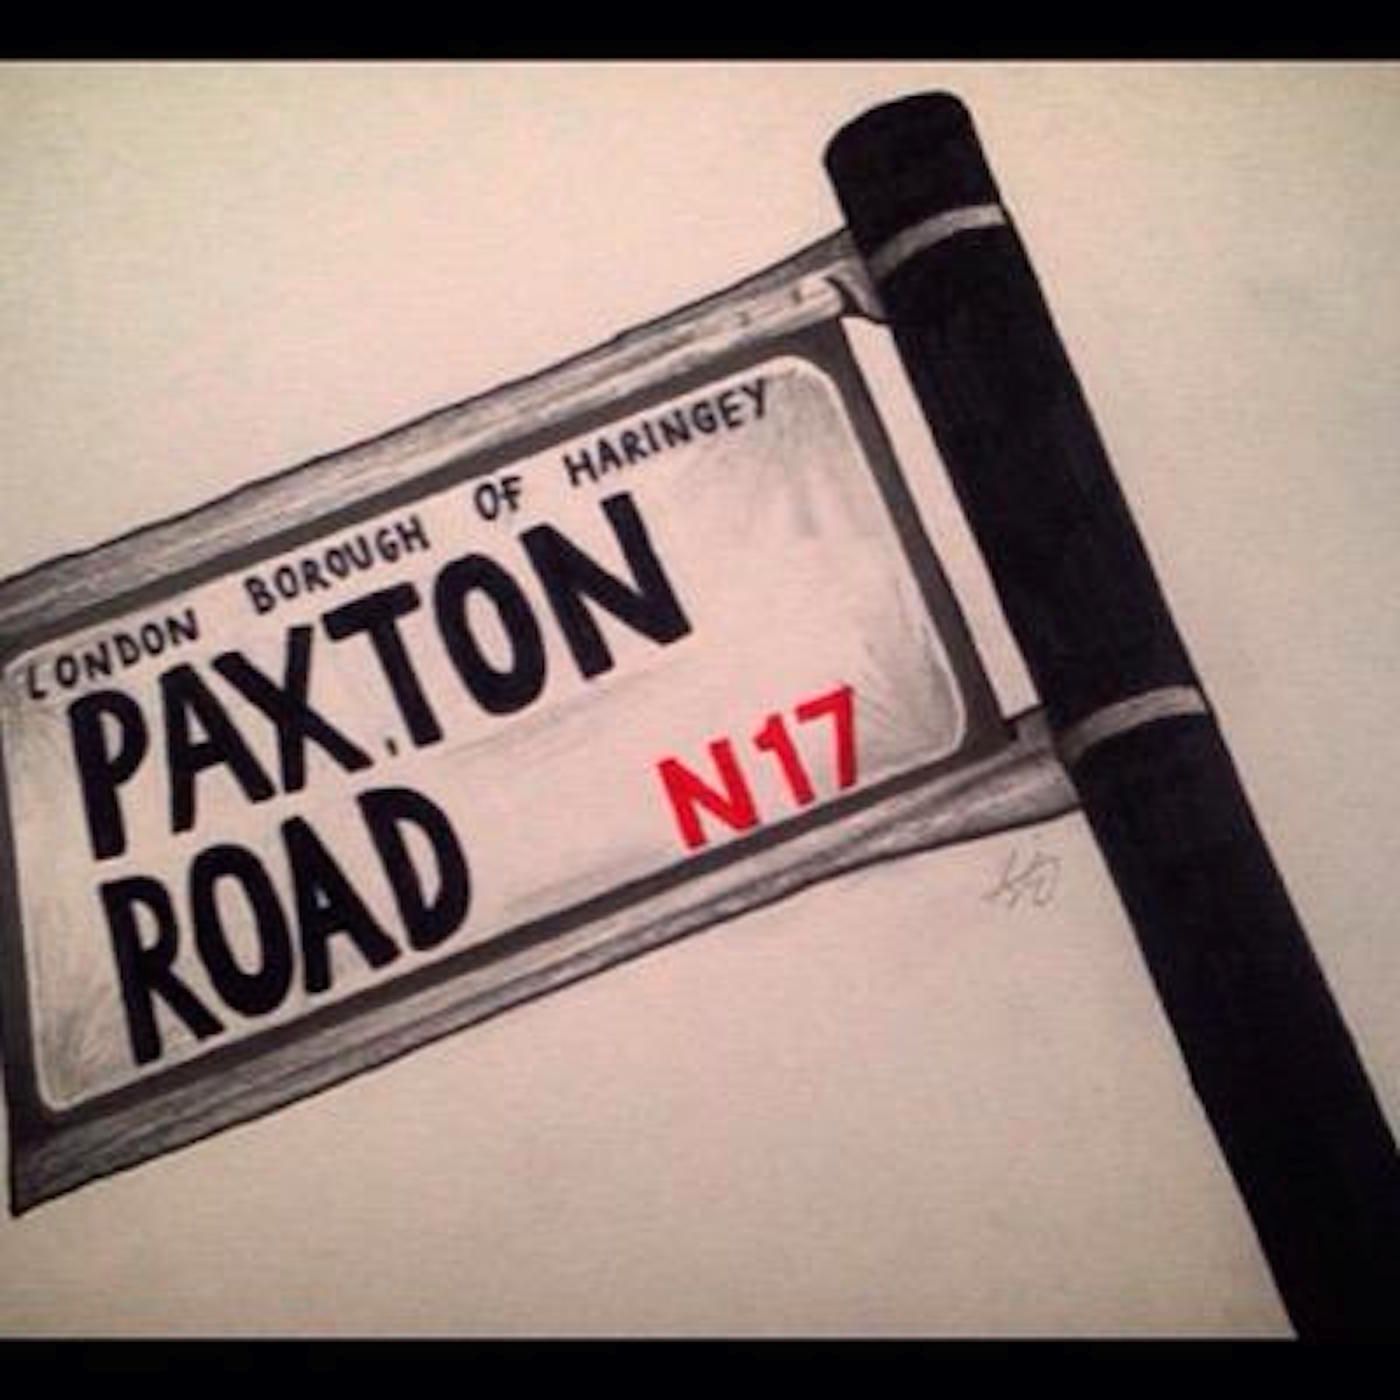 Paxton Road Podcast